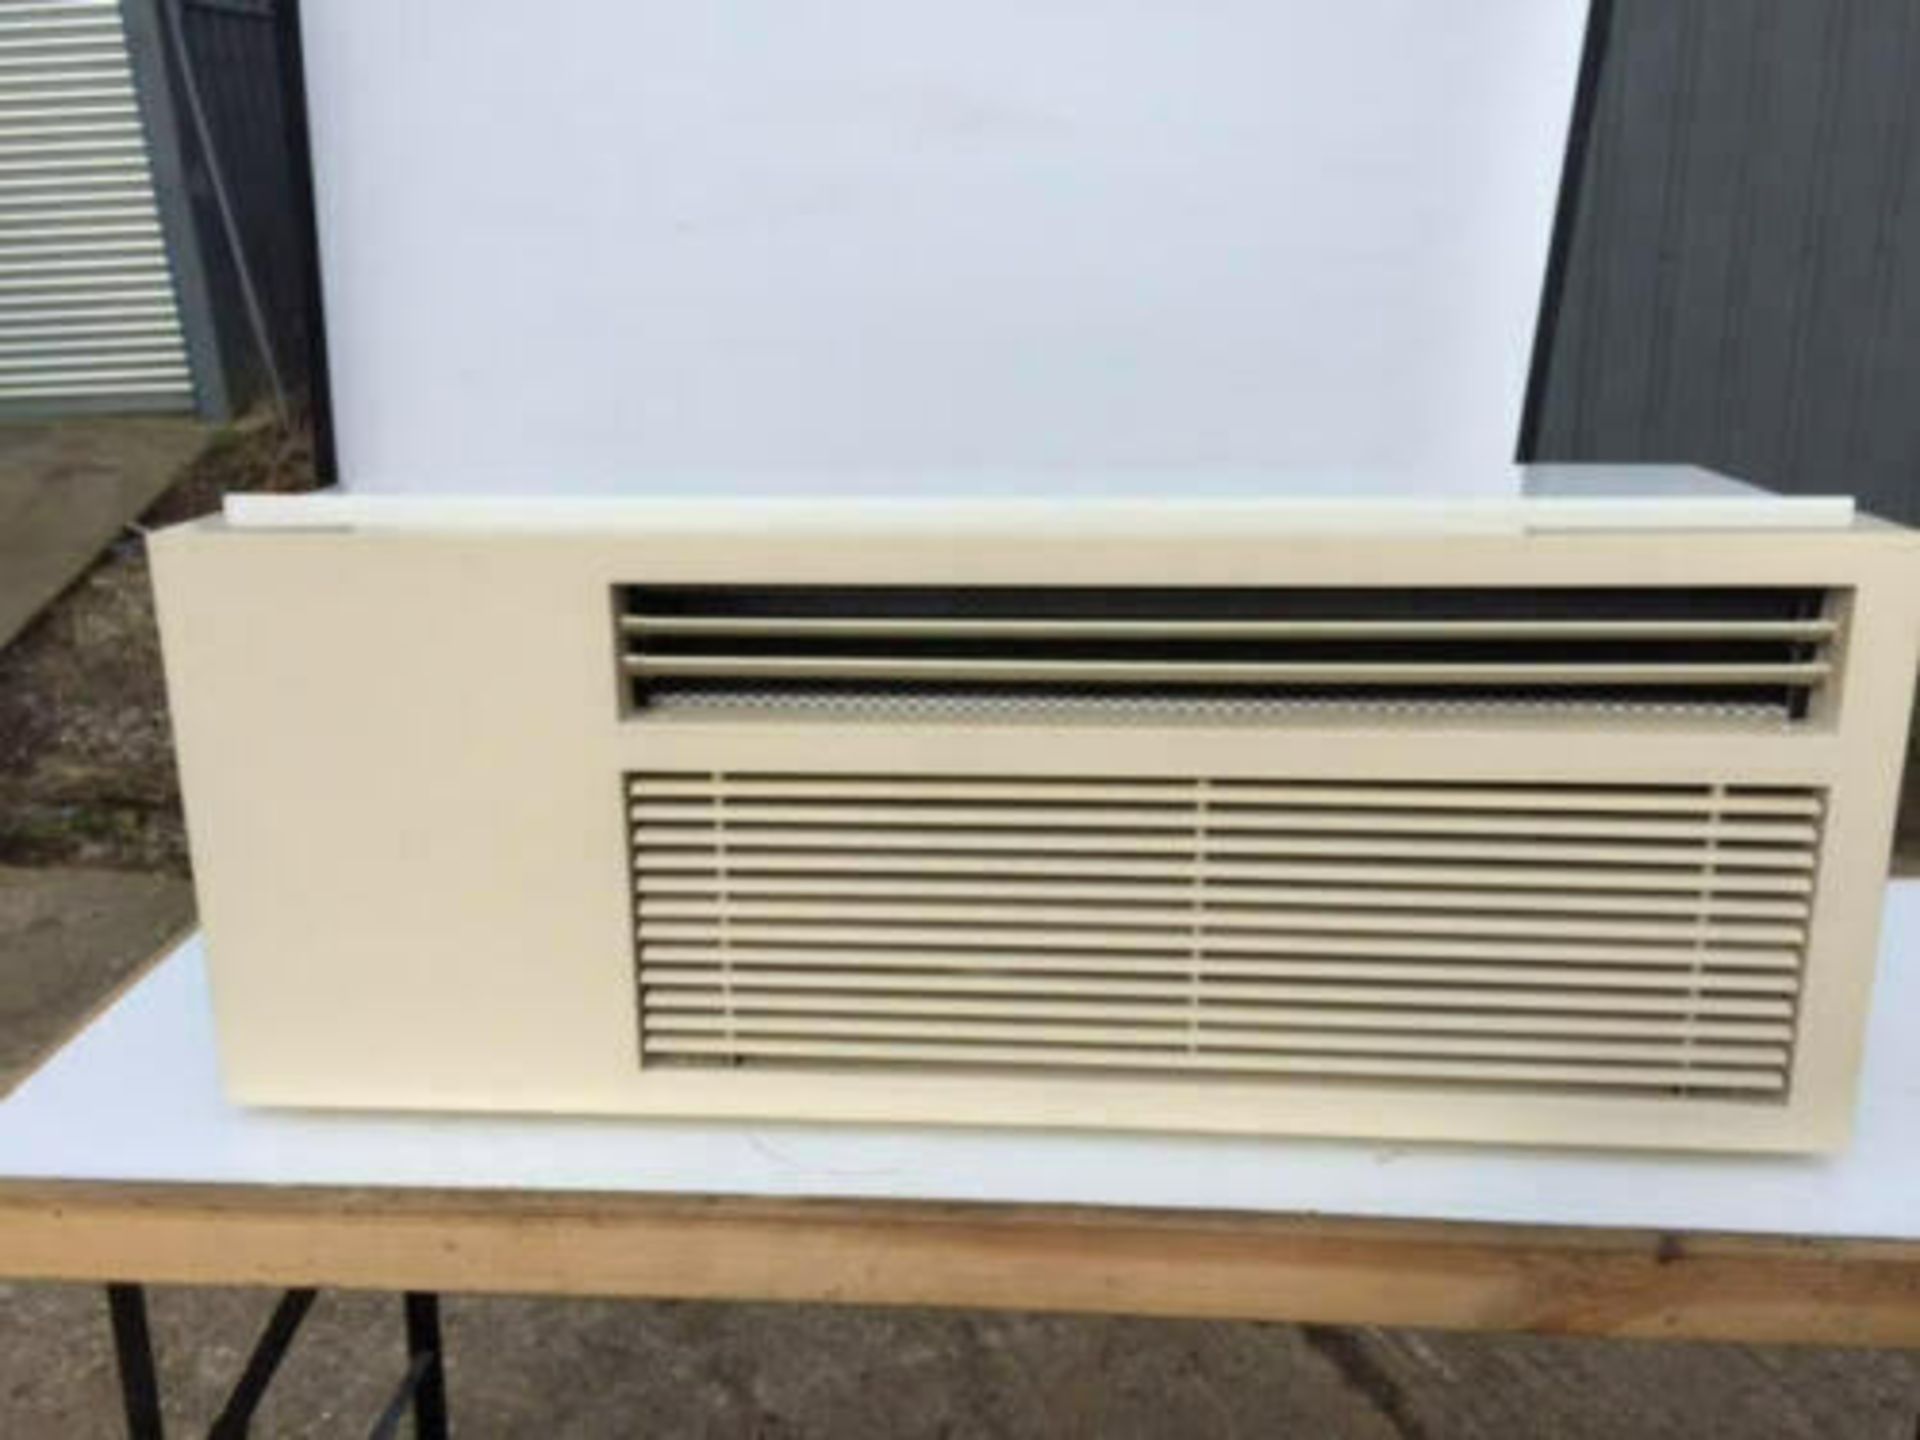 1 x Eco Air Conditioning Heat Pump through wall unit. Brand new, boxed and sealed - Image 2 of 8